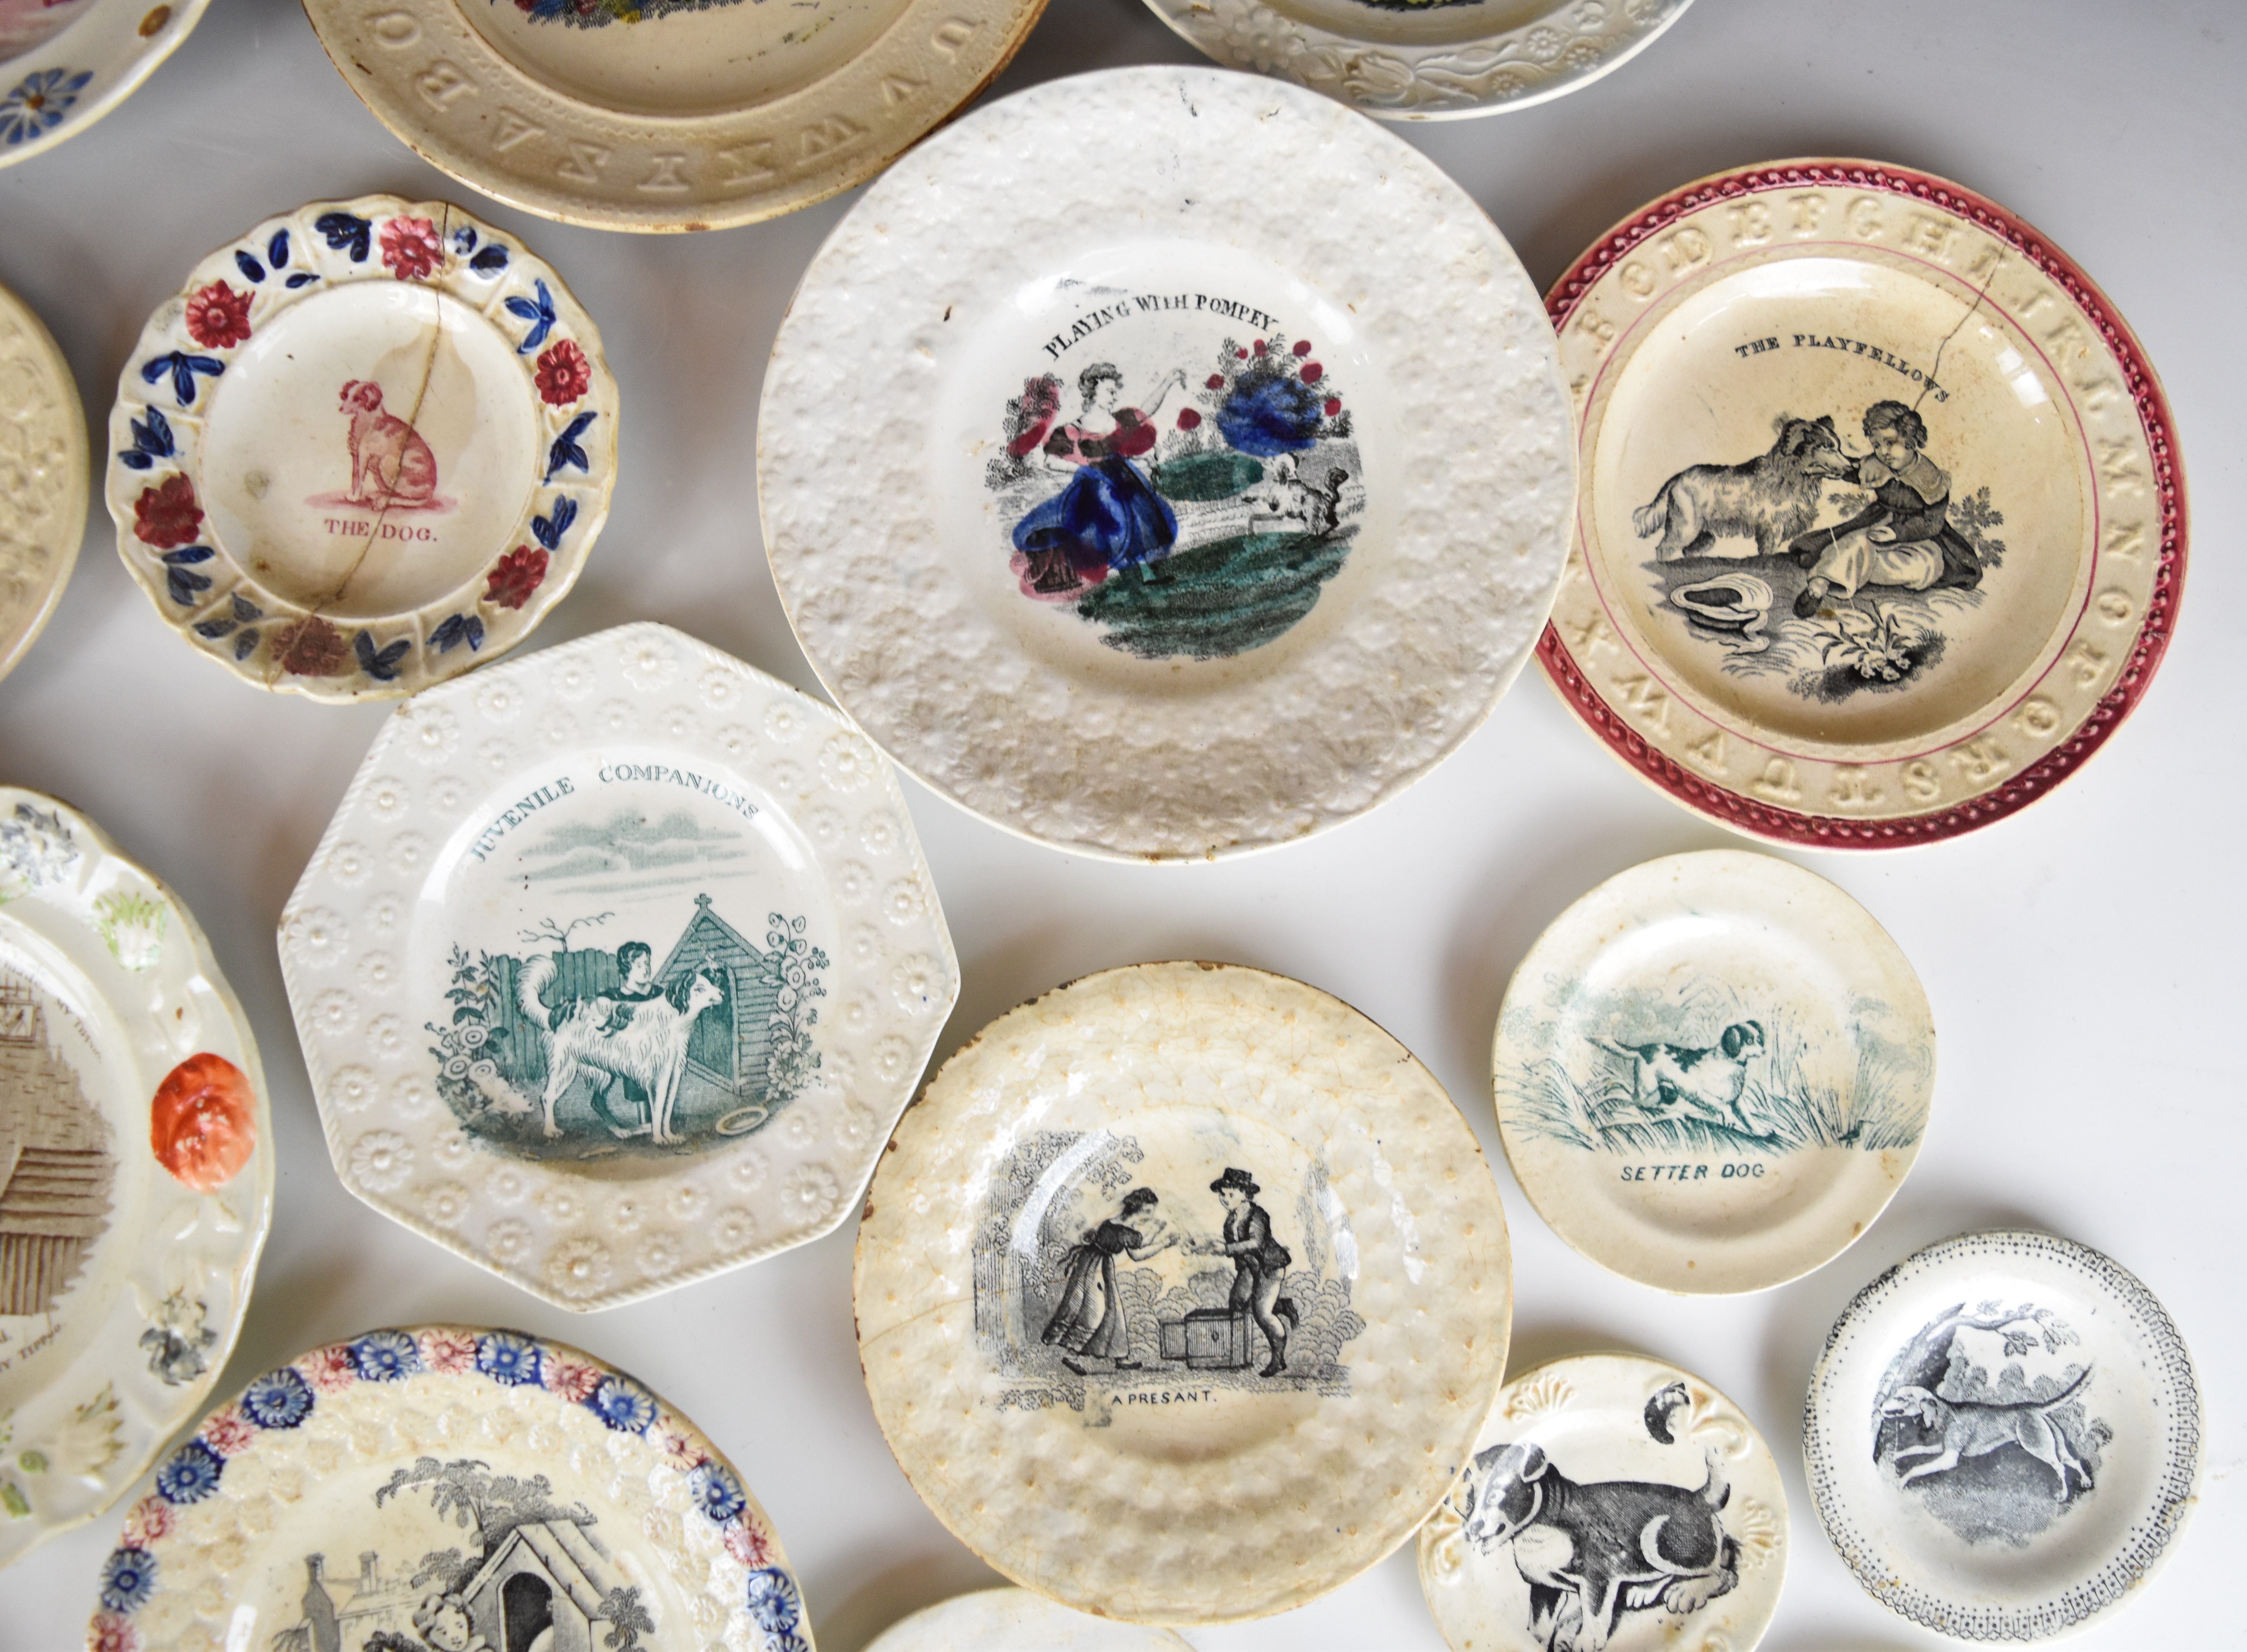 19thC nursery ware plates, mostly featuring dogs / children including The Pet, A Presant, Juvenile - Image 5 of 7